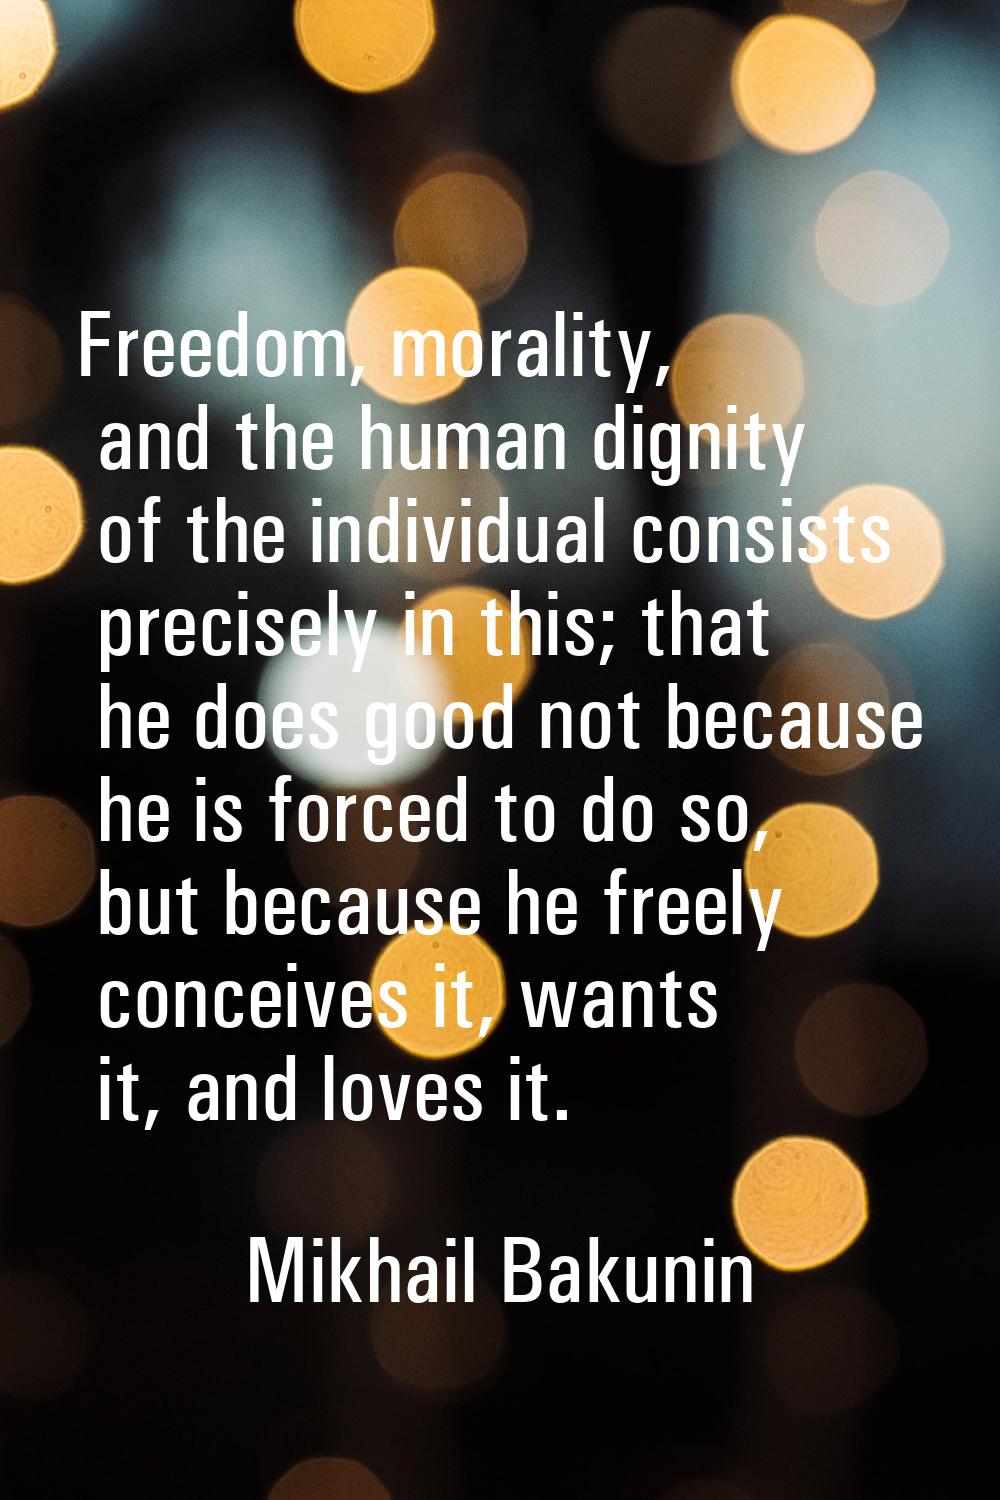 Freedom, morality, and the human dignity of the individual consists precisely in this; that he does